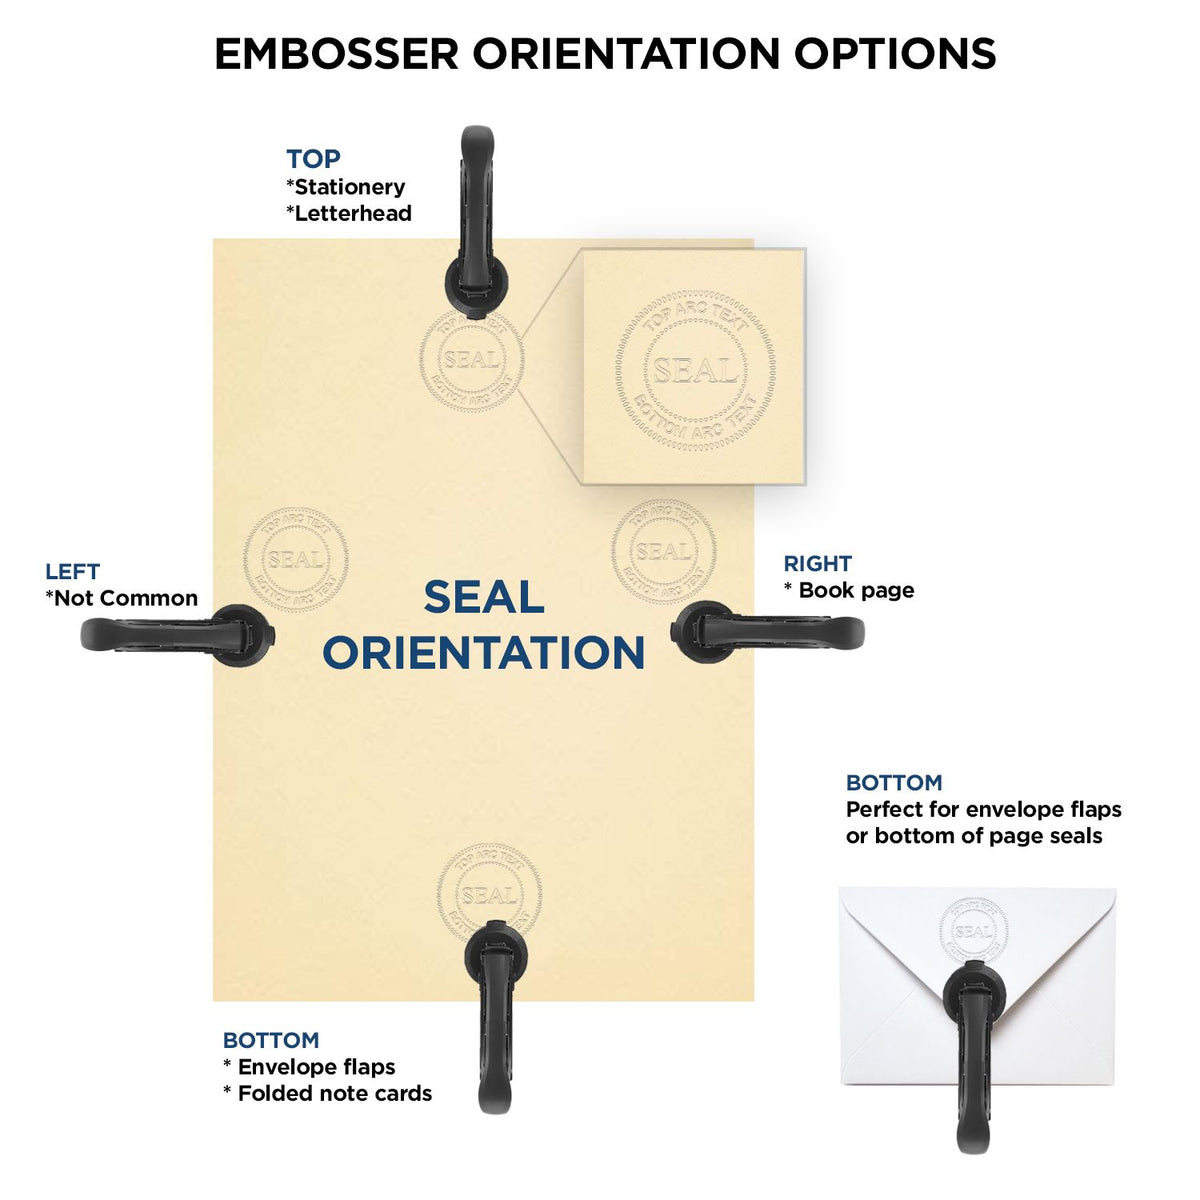 An infographic for the Heavy Duty Cast Iron Virginia Engineer Seal Embosser showing embosser orientation, this is showing examples of a top, bottom, right and left insert.